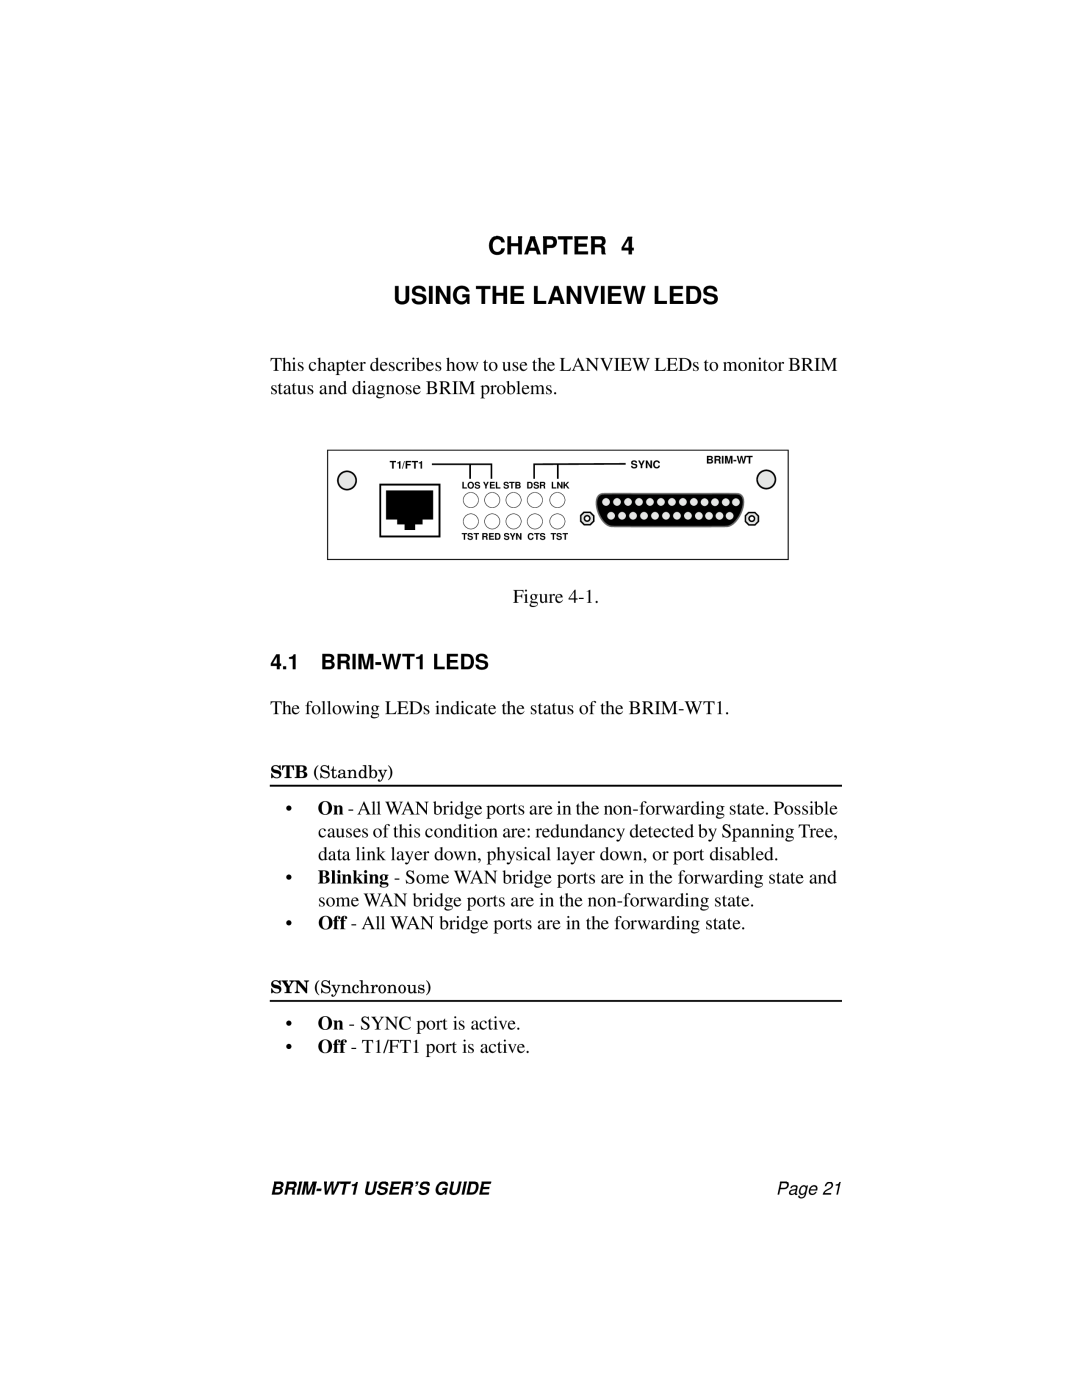 Cabletron Systems manual Chapter Using The Lanview Leds, BRIM-WT1 LEDS 